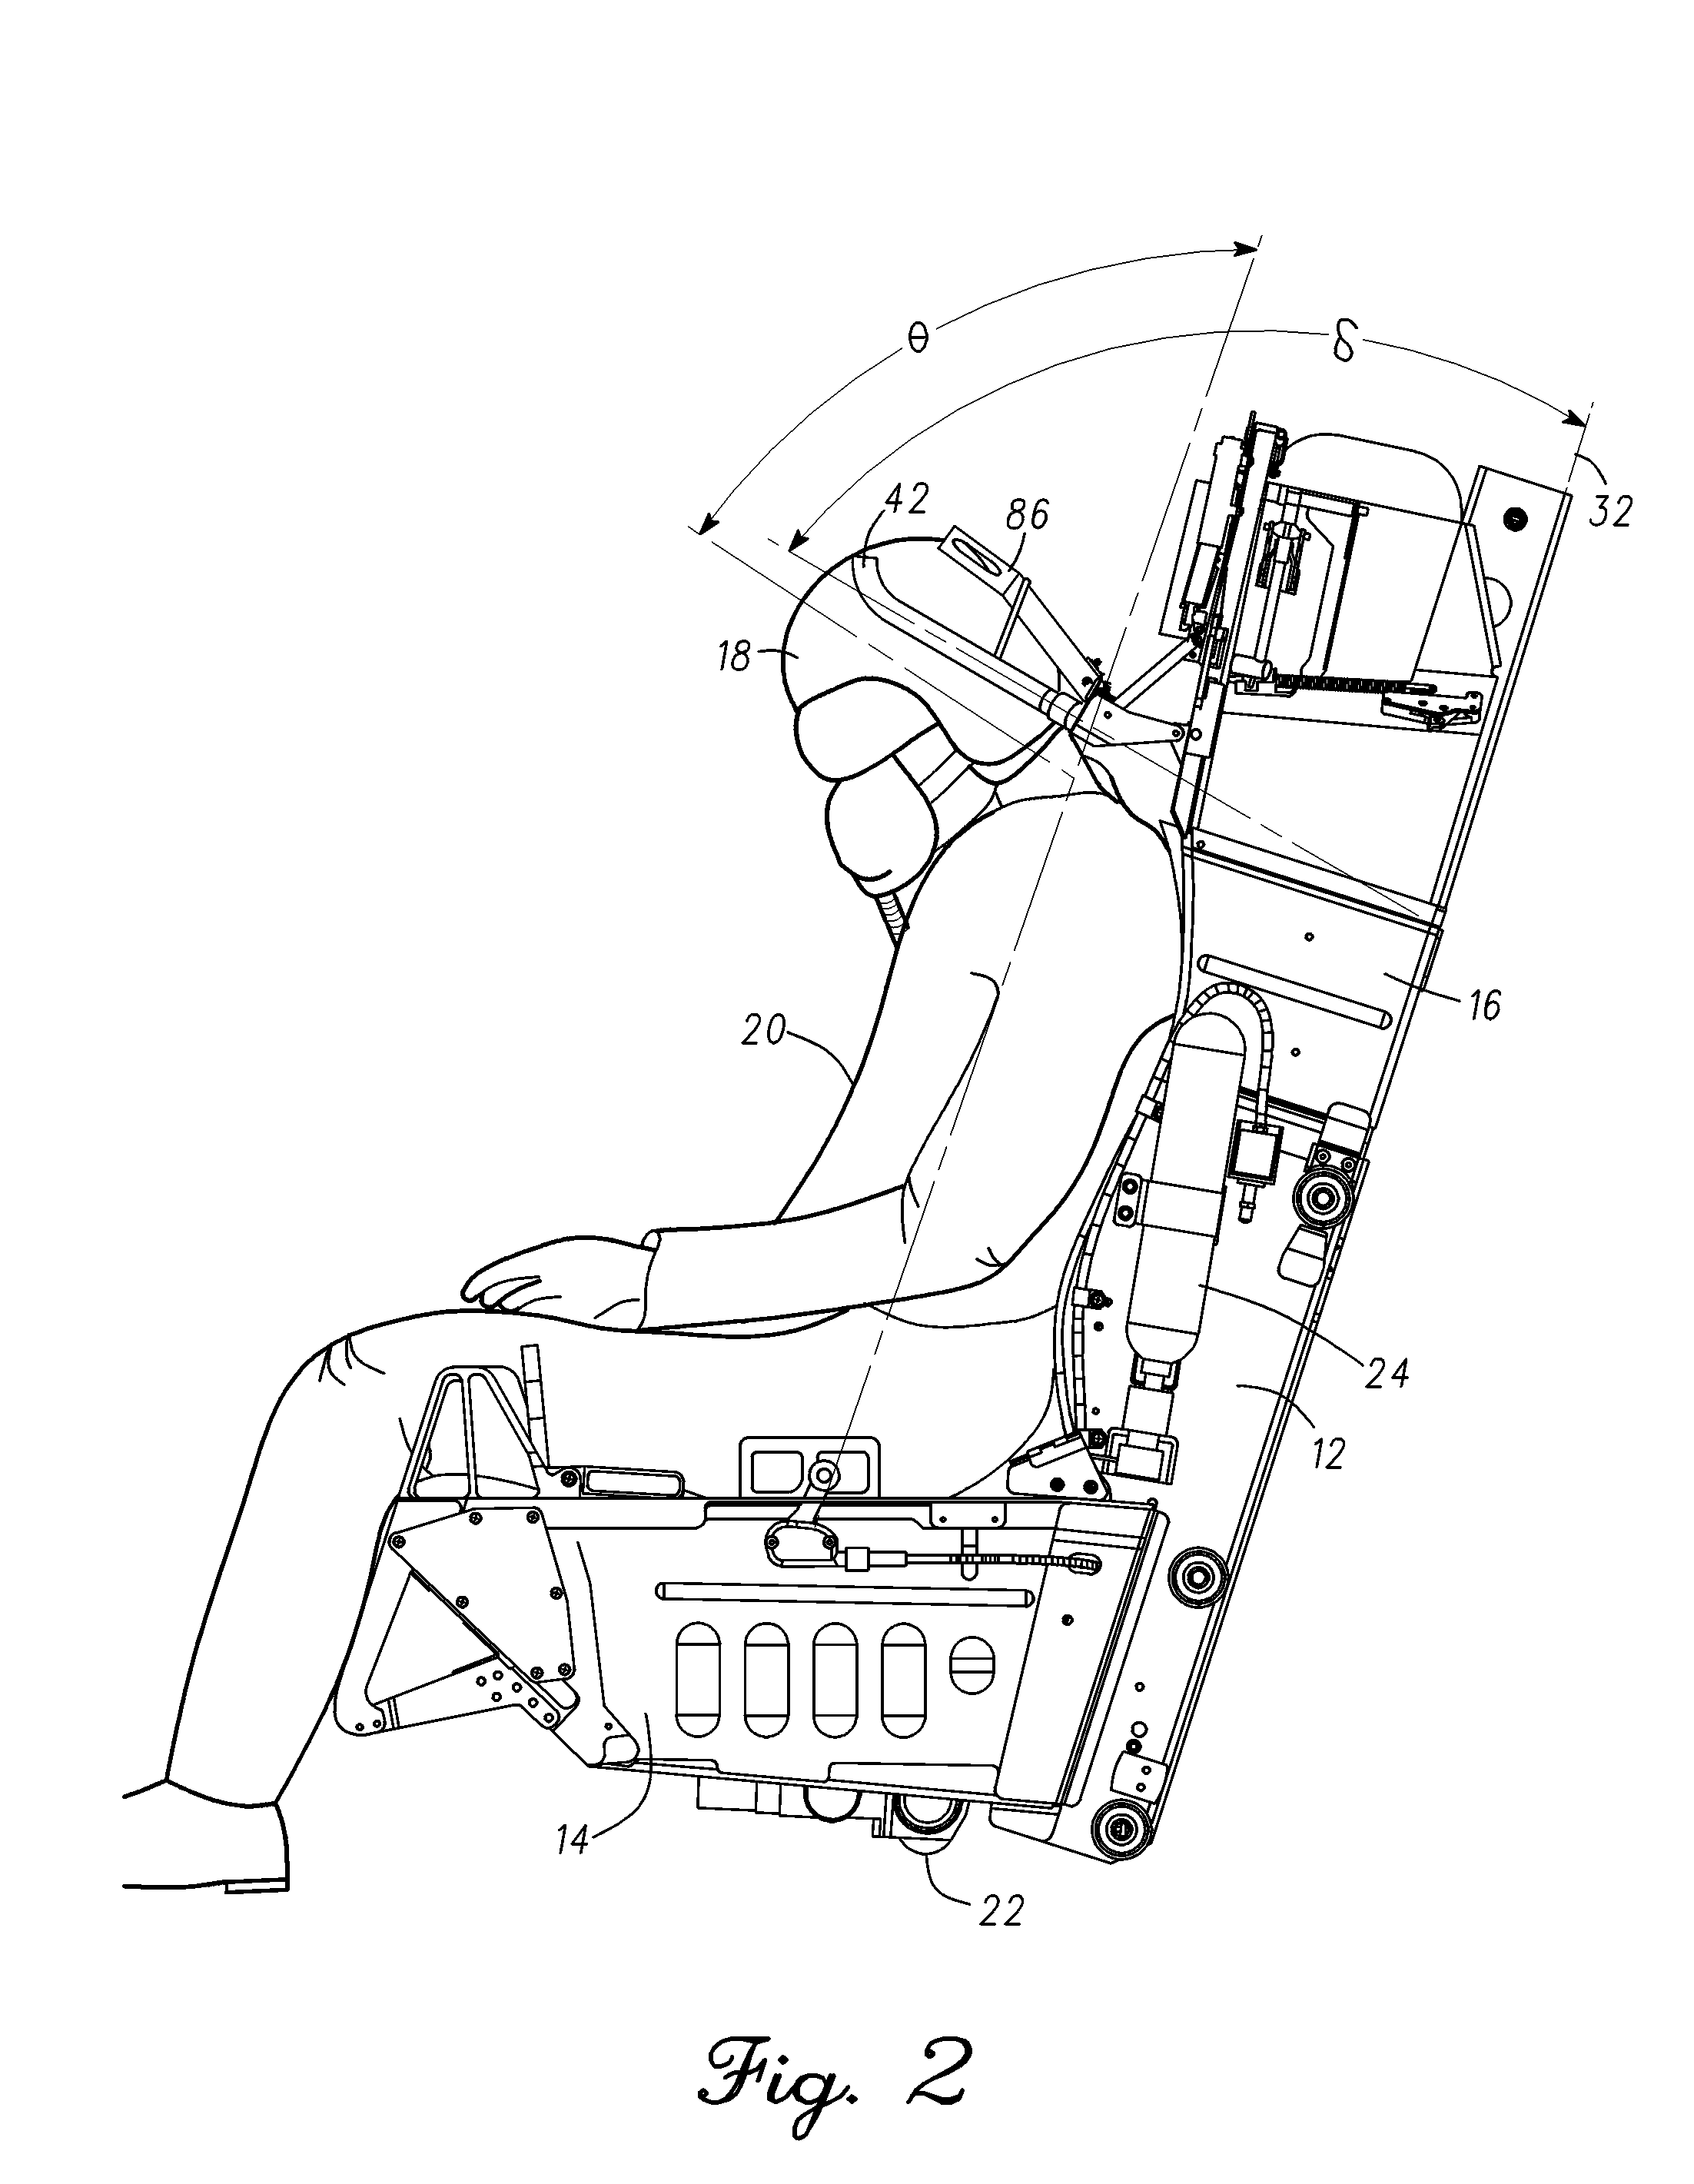 Aircraft ejection seat with moveable headrest